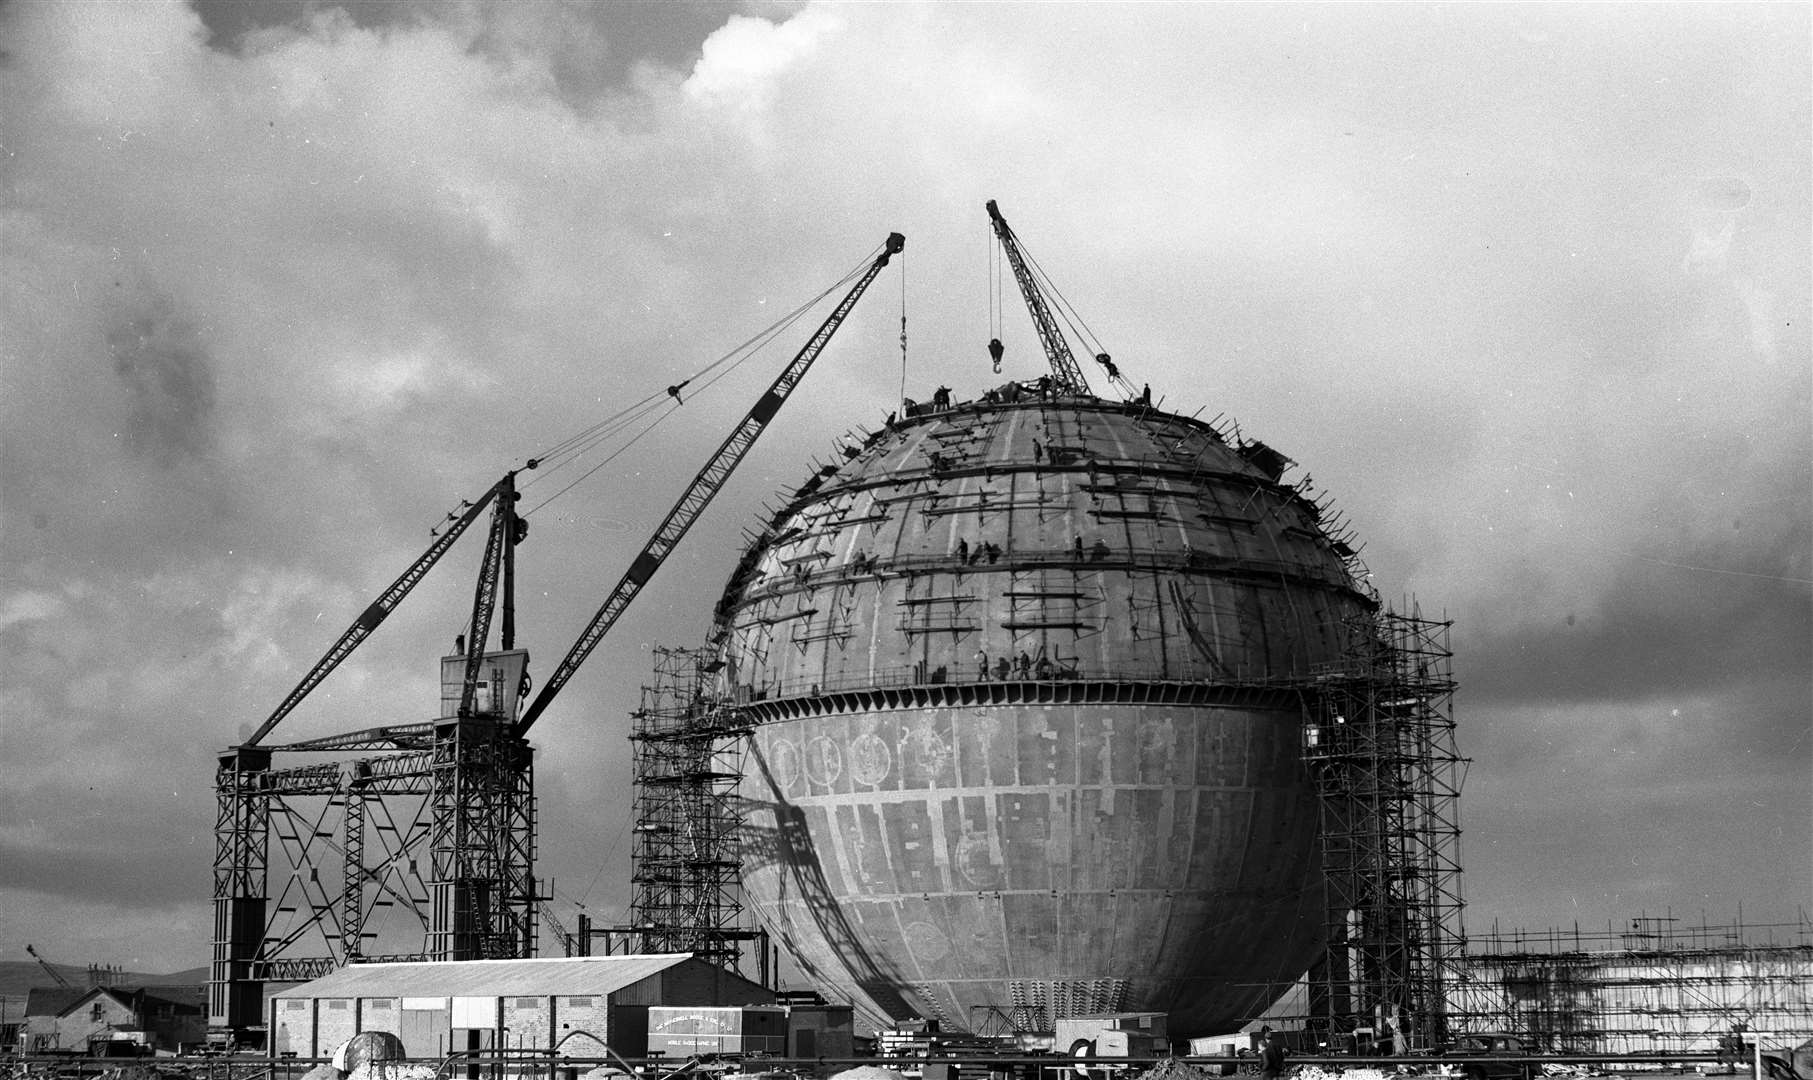 The Dounreay dome under construction in the 1950s. Picture: Dounreay (a division of Magnox) and NDA